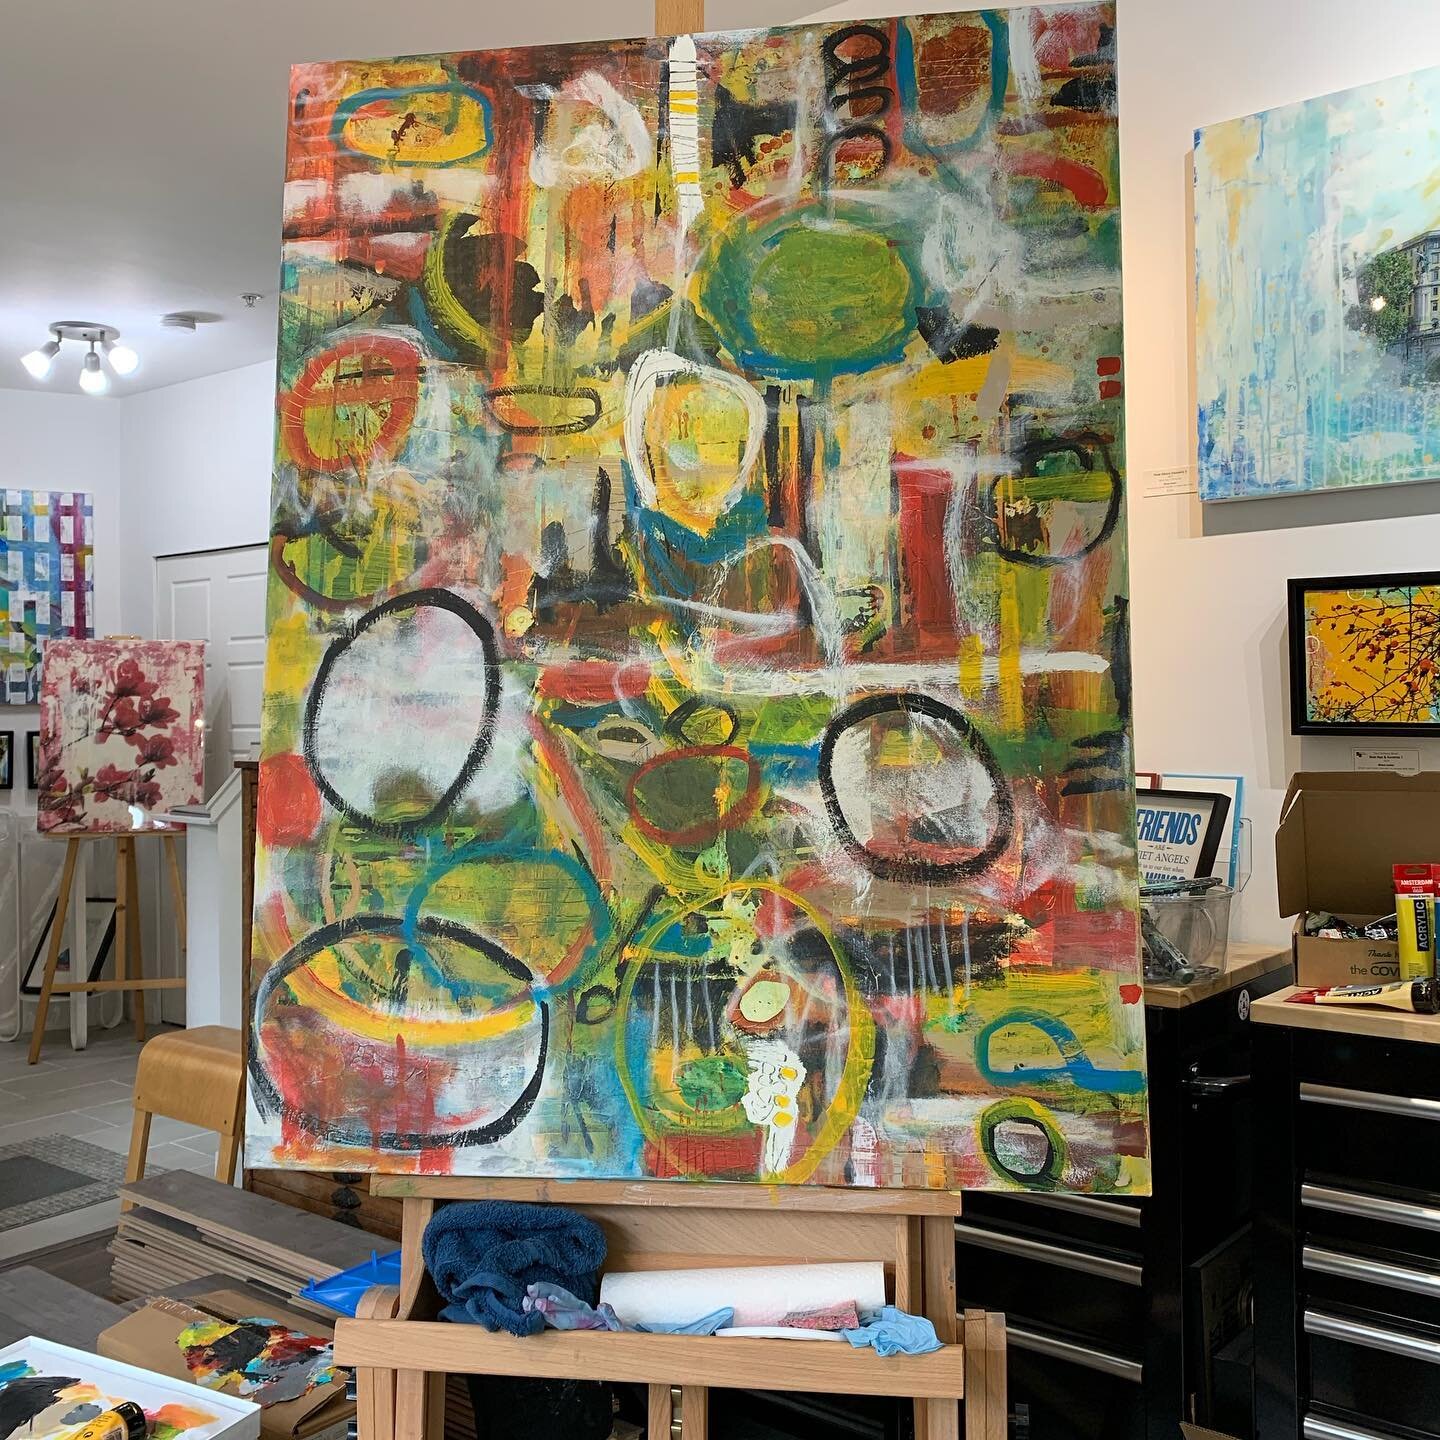 In the studio today. Working on a larger piece today. Do you see what I see or am I just crazy? 🤪 Each piece says something to me that becomes so clear as I develop the painting and yet I imagine no one else sees what I see. 

#paulwoodartist #wip #